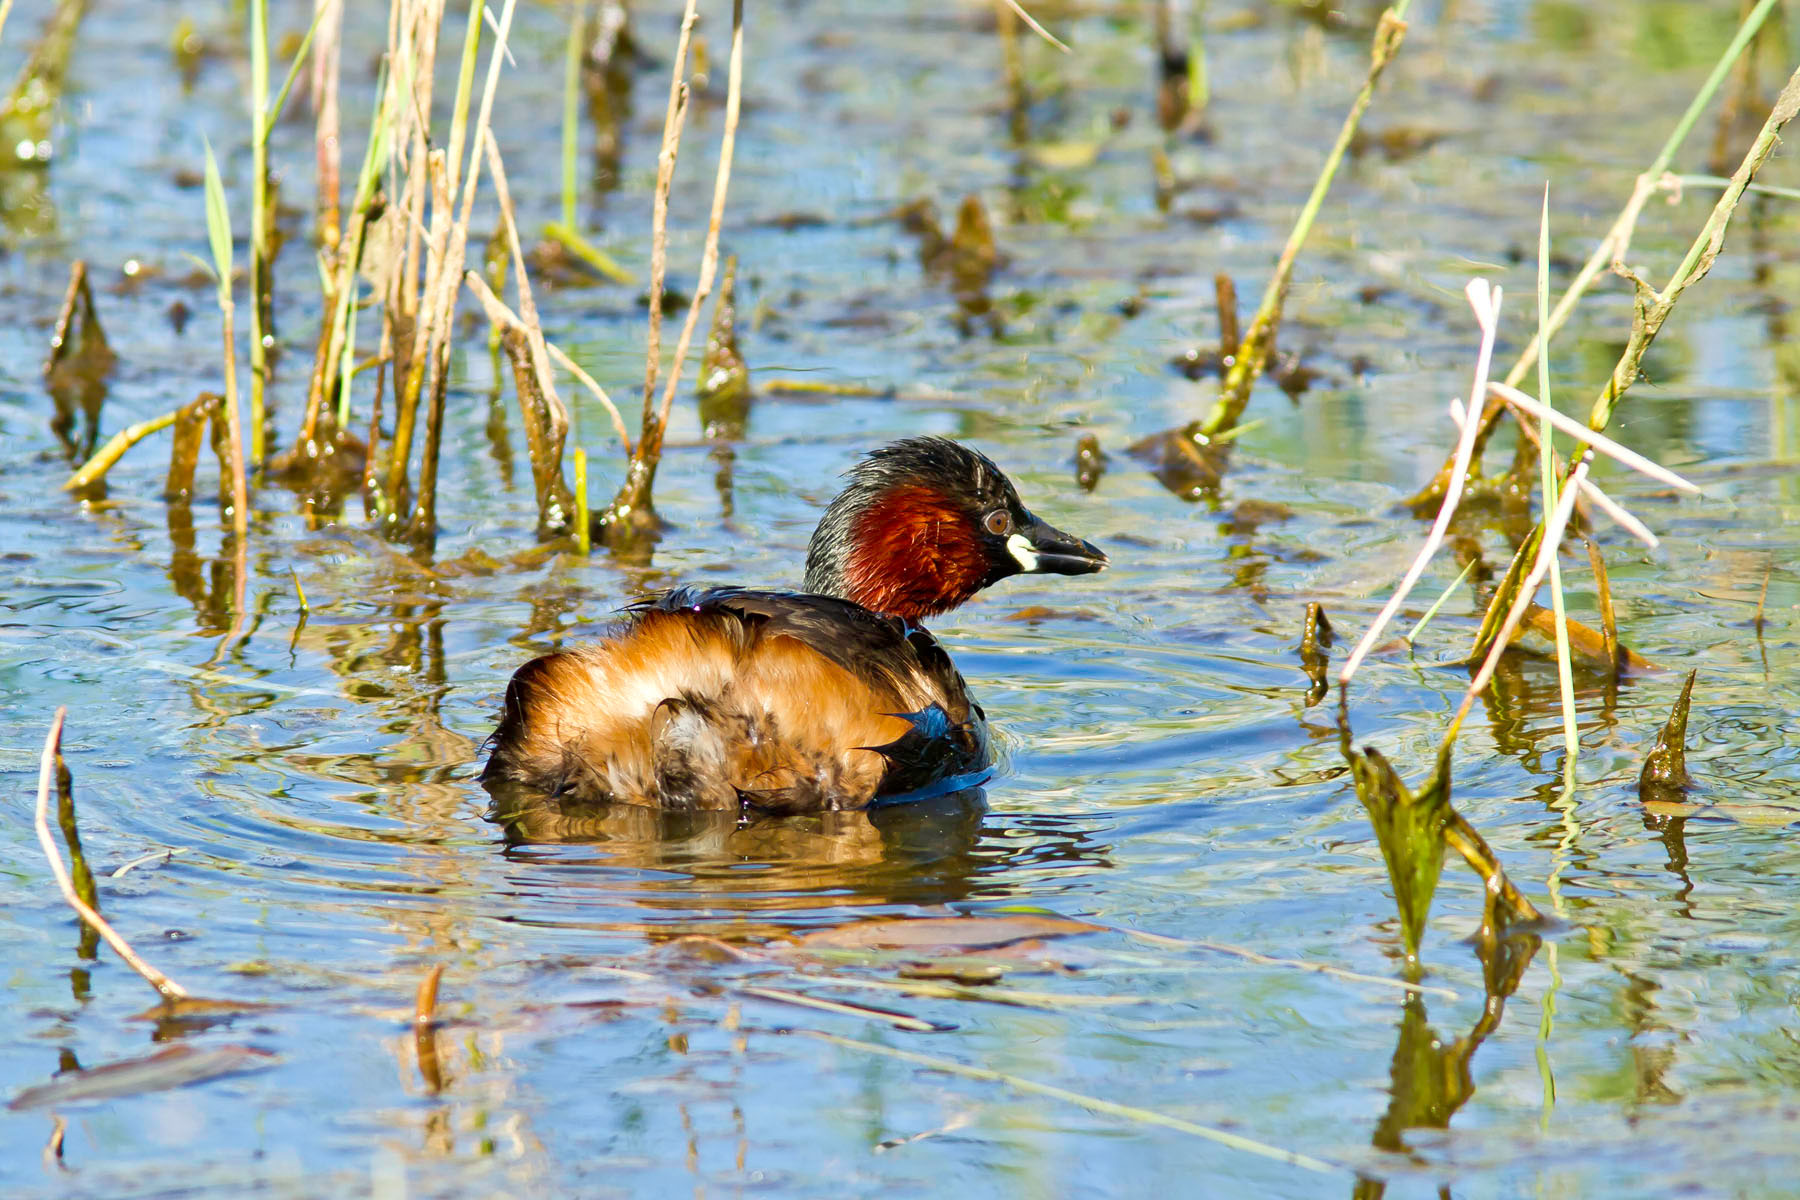 /Guewen/galeries/public/Nature/France/Grebes_Brenne/Grebes_009.jpg